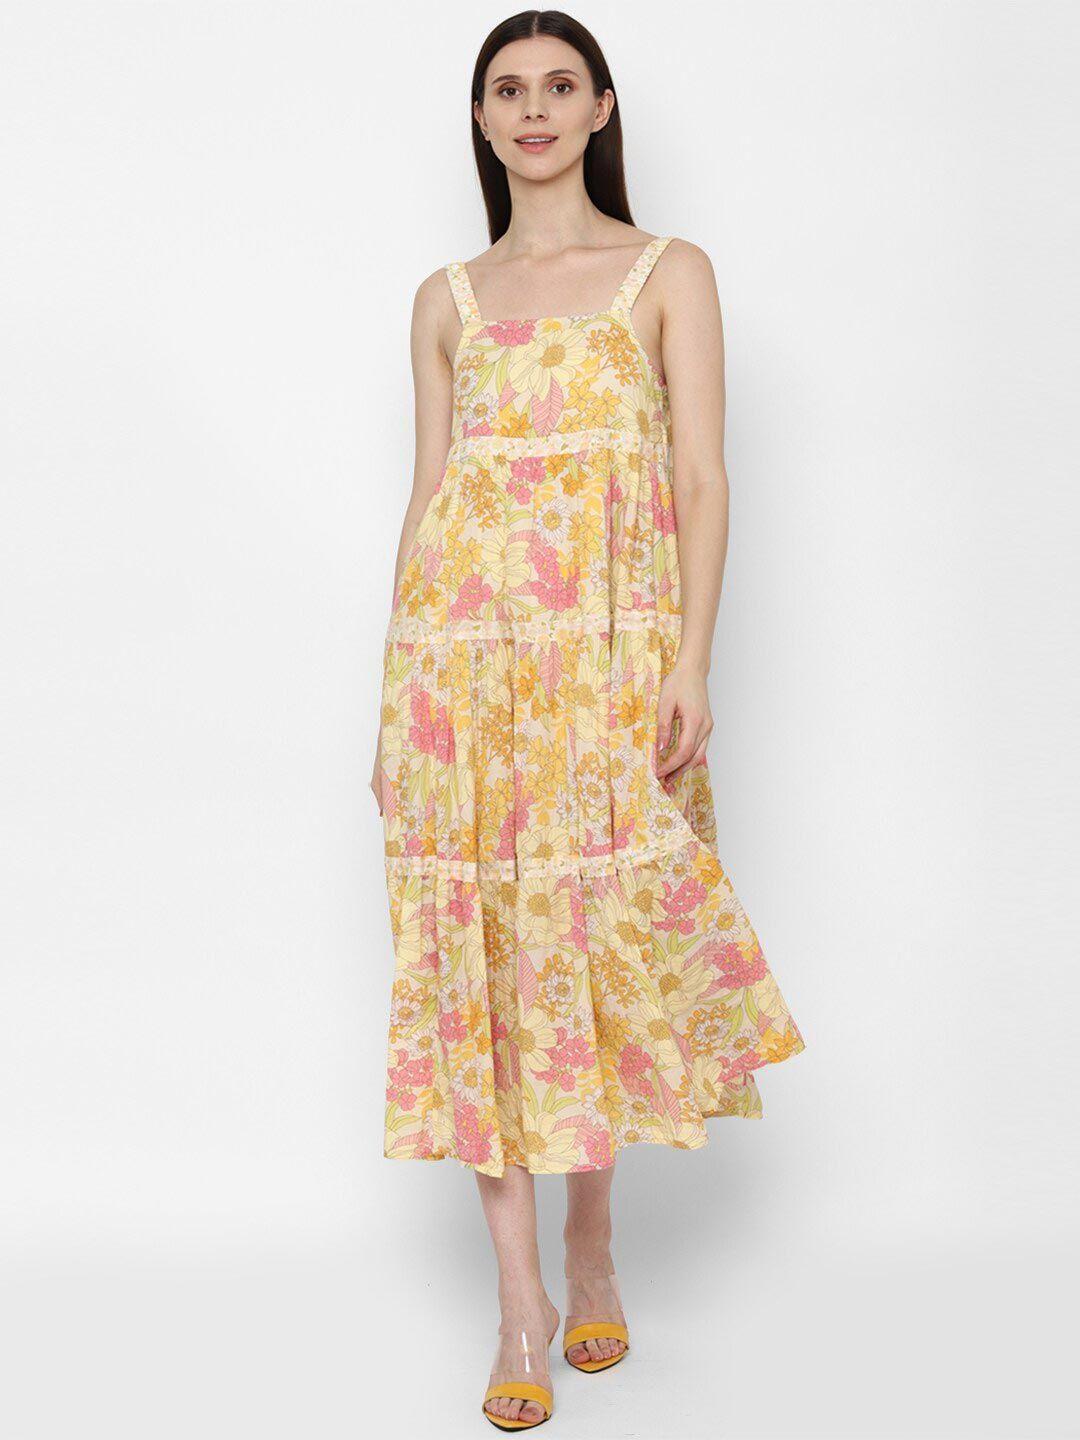 american-eagle-outfitters-women-yellow-floral-layered-midi-dress